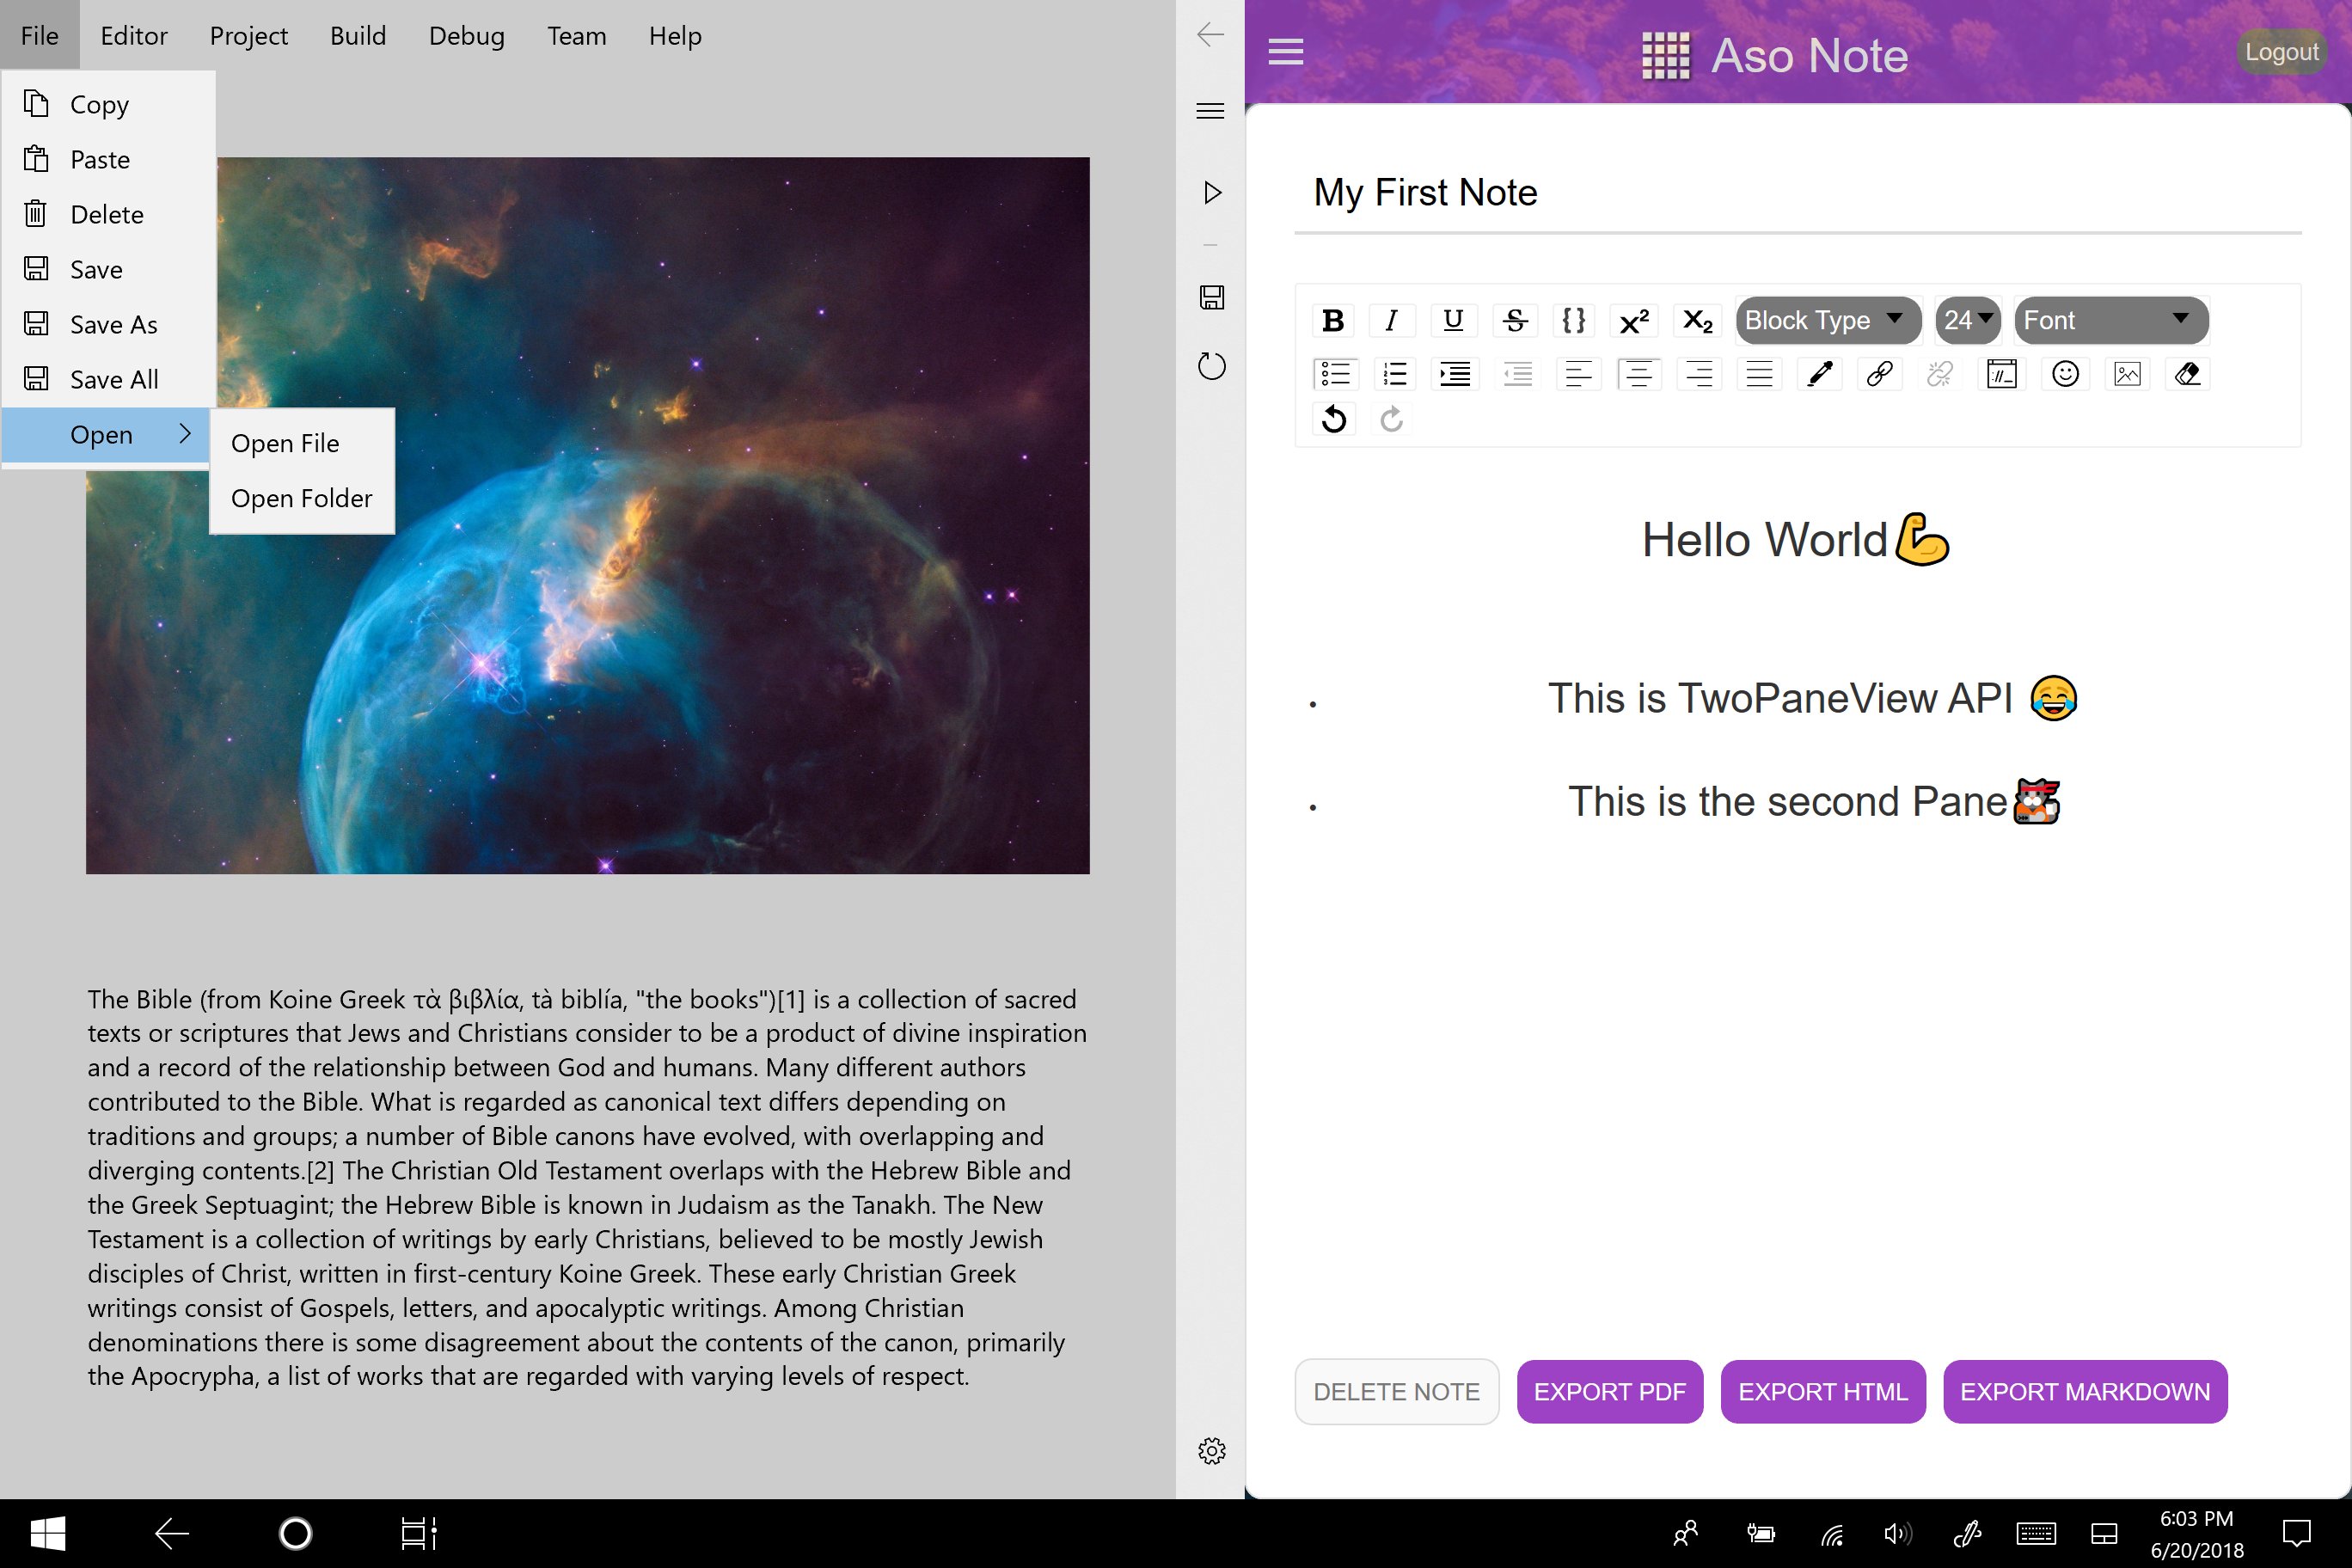 This is what a dual-pane Windows 10 app could look like